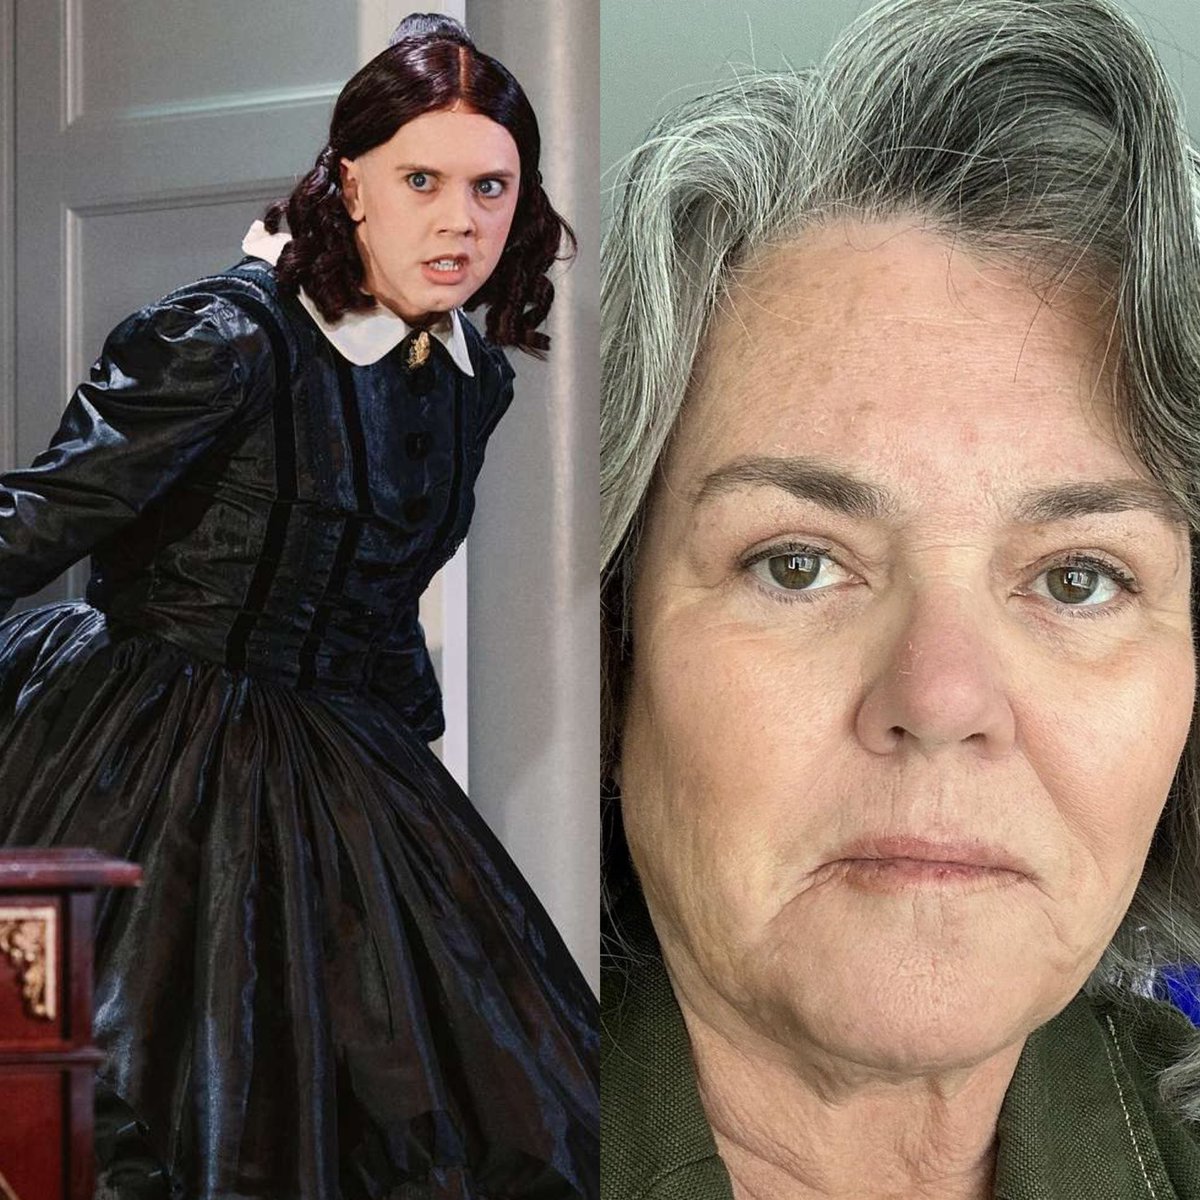 Still can’t believe we’re blessed enough to live in a timeline in which Cole Escola is Mary Todd Lincoln on Broadway and Rosie O’Donnell is Mary on a SEX AND THE CITY revival. True embarrassment of riches.